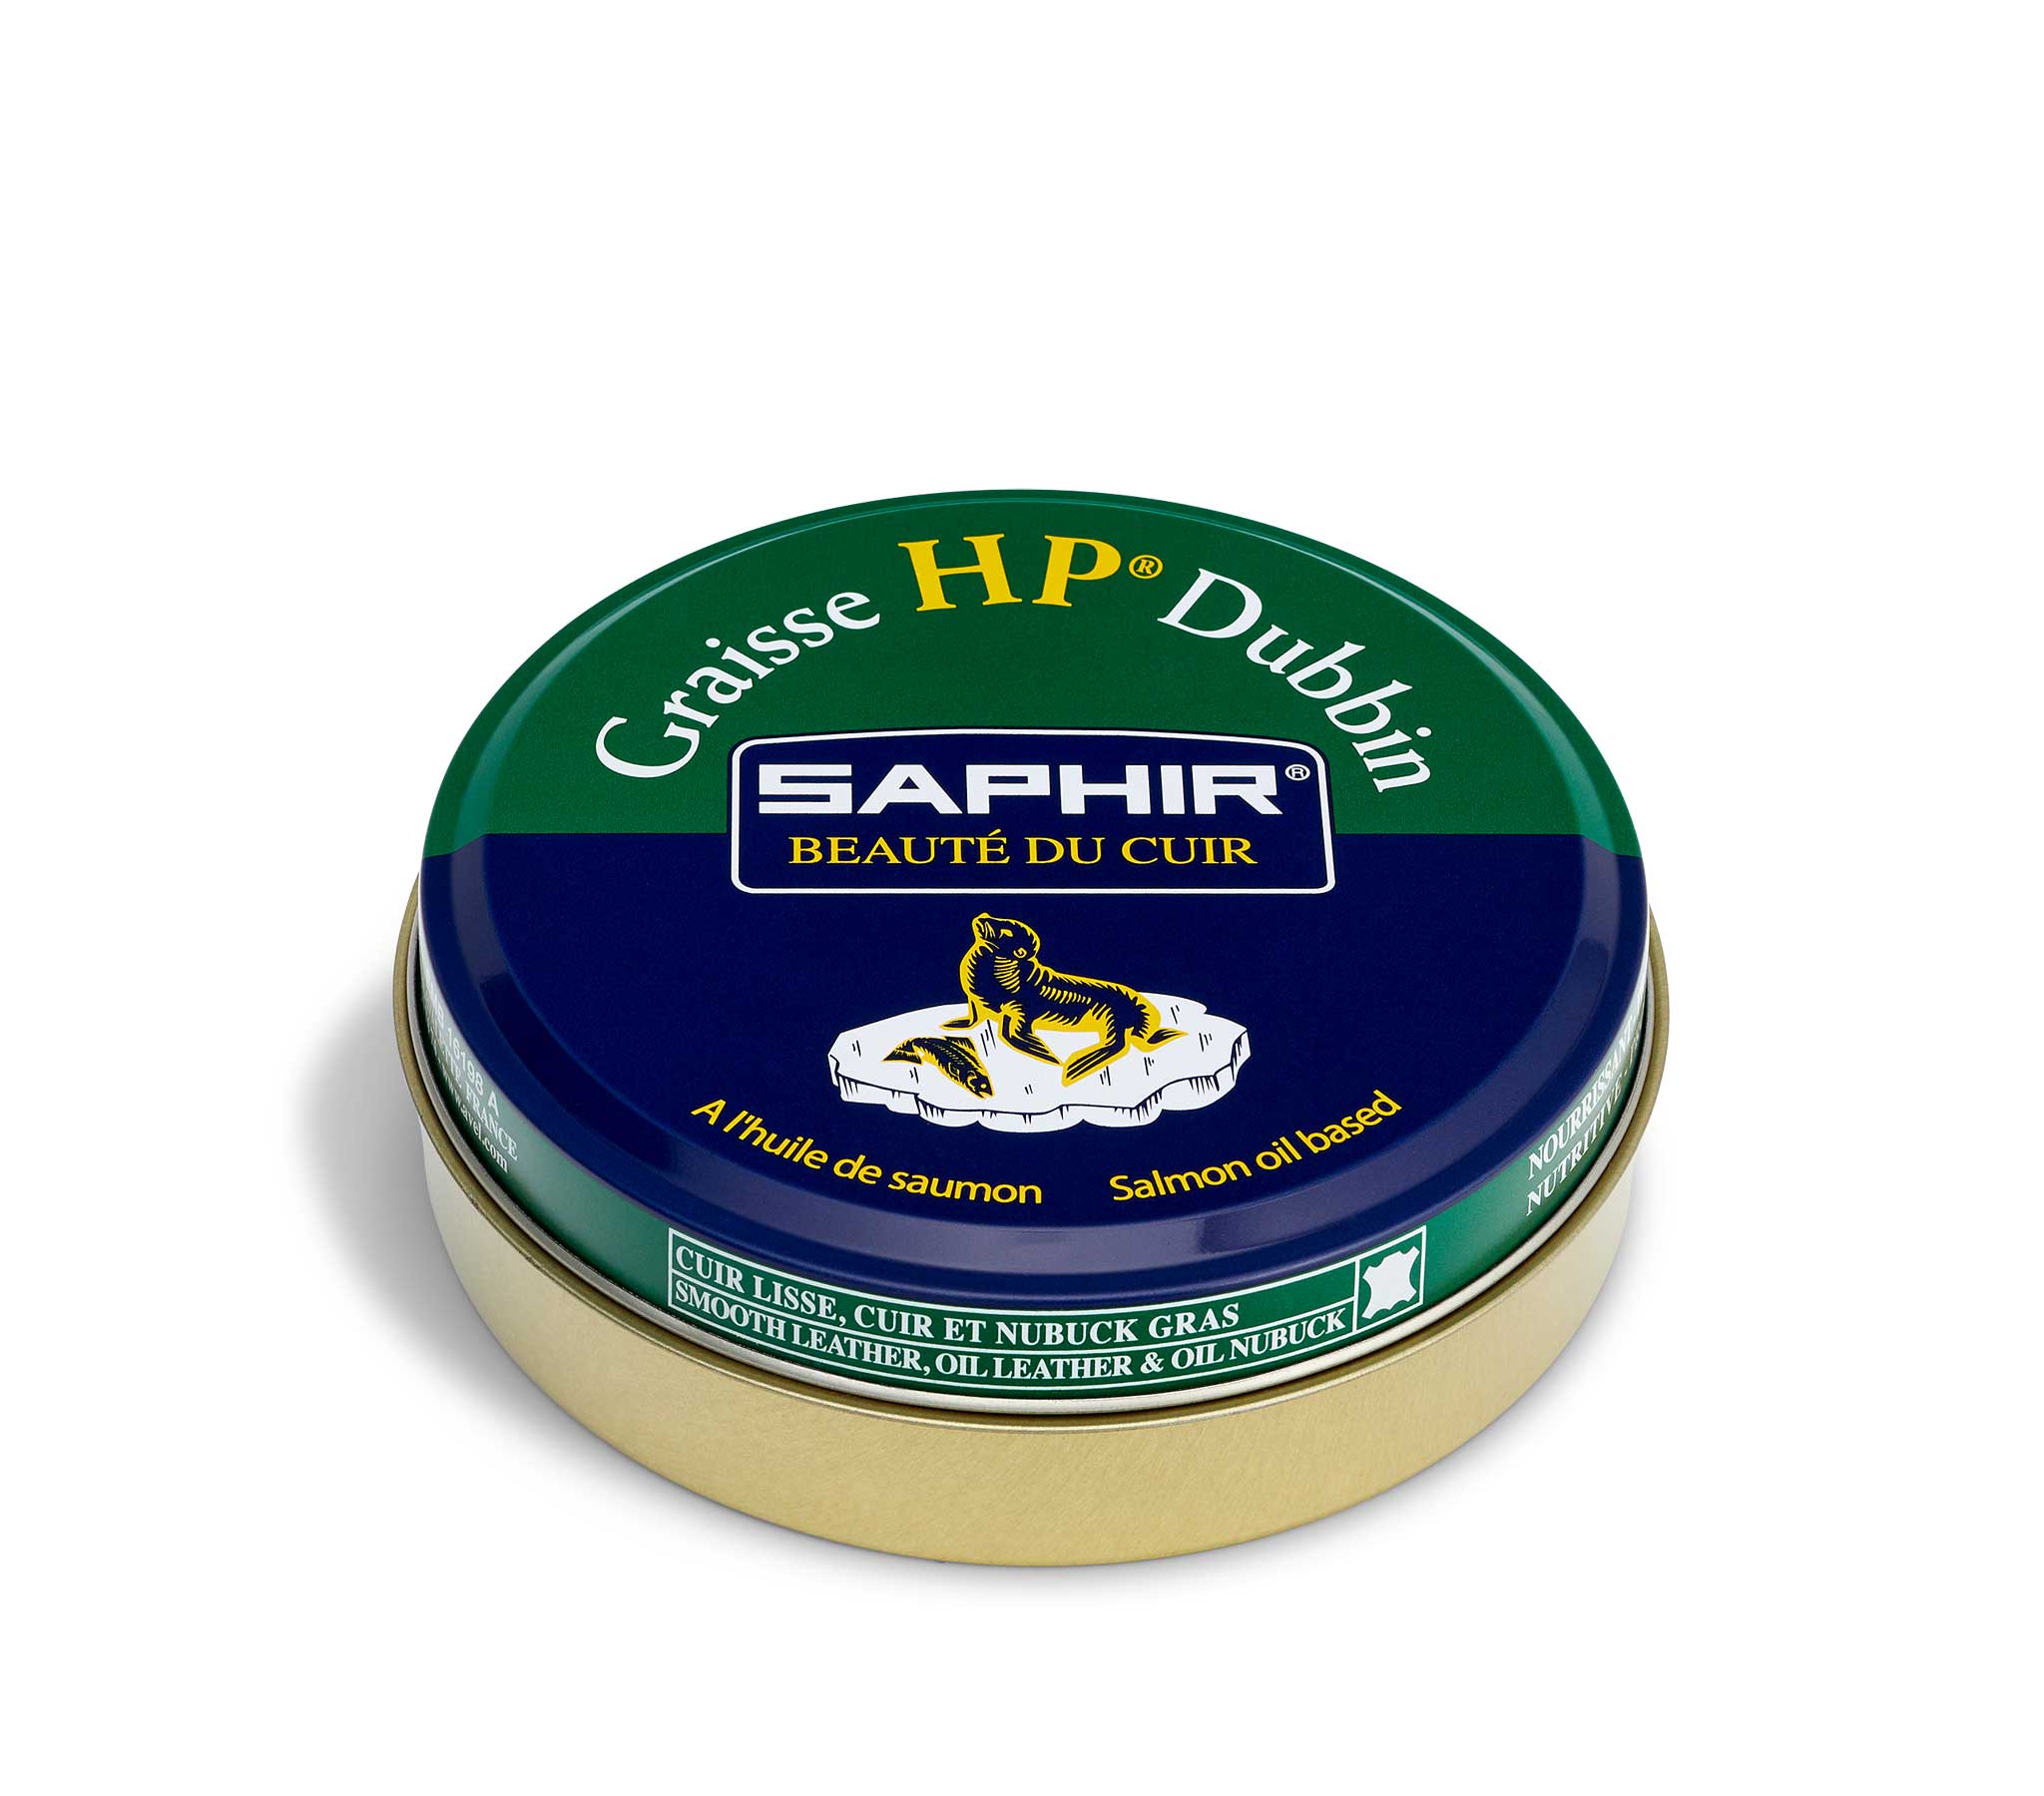  Saphir Creme Cuir Gras - Cream for Oiled Leather 125ml (Brown)  : Clothing, Shoes & Jewelry